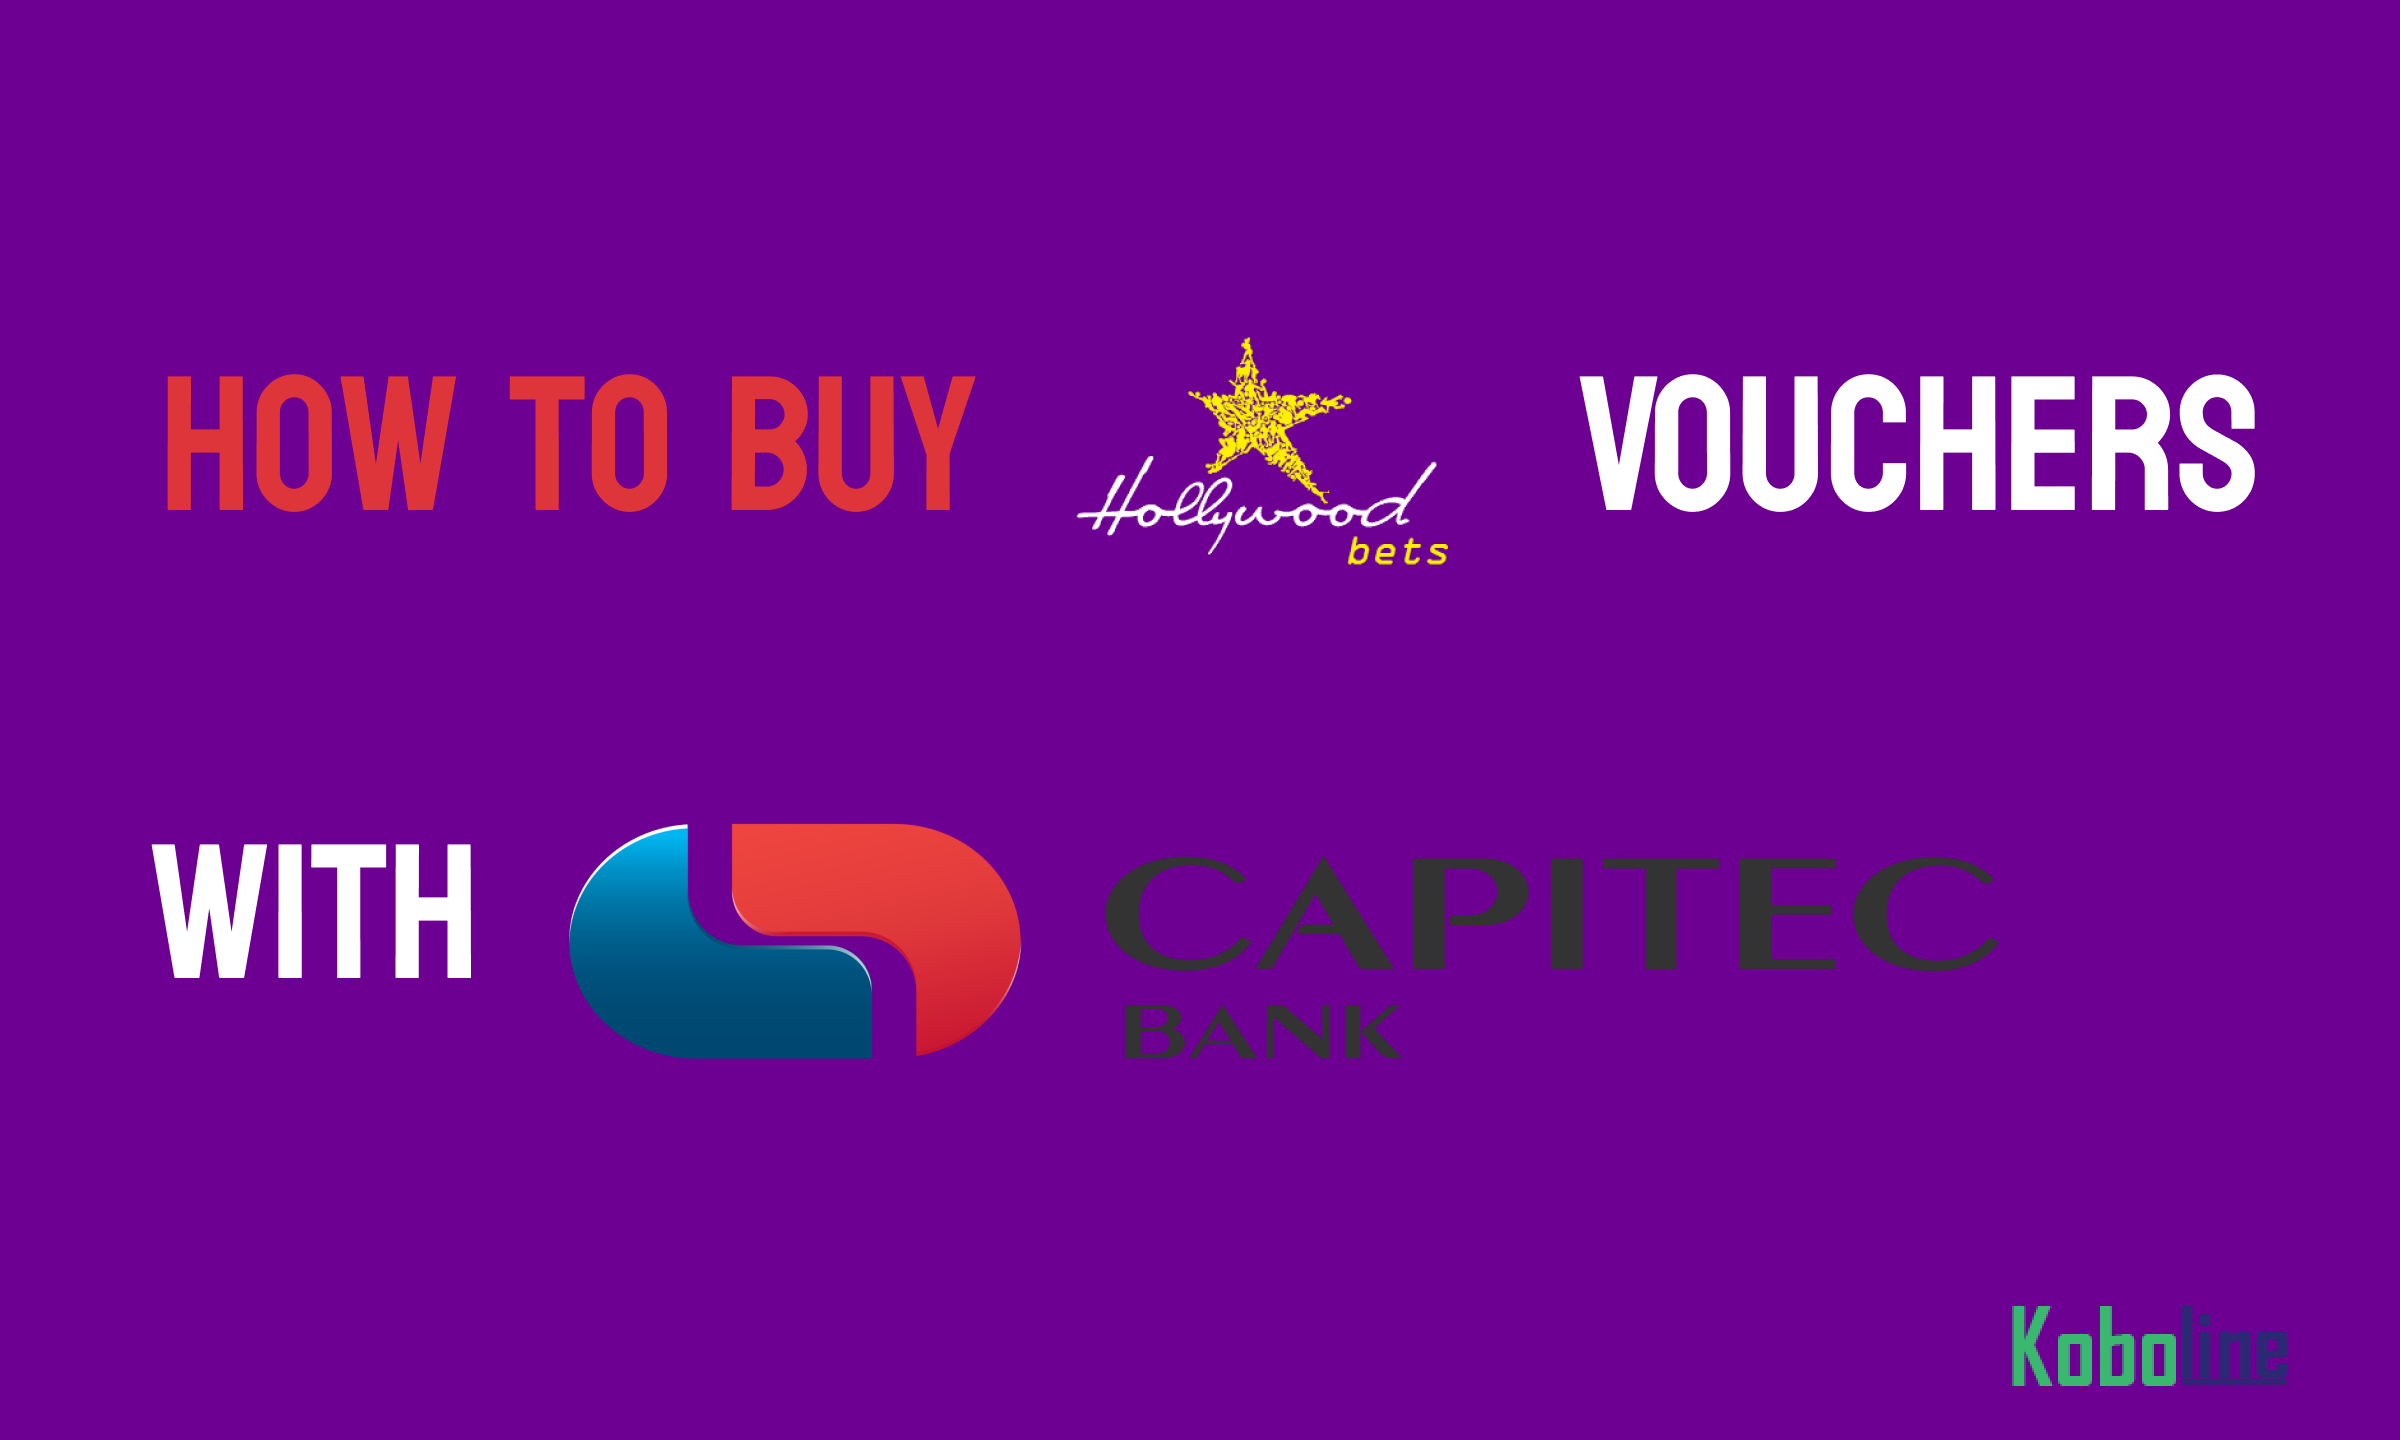 How to Buy Hollywood Voucher with Capitec